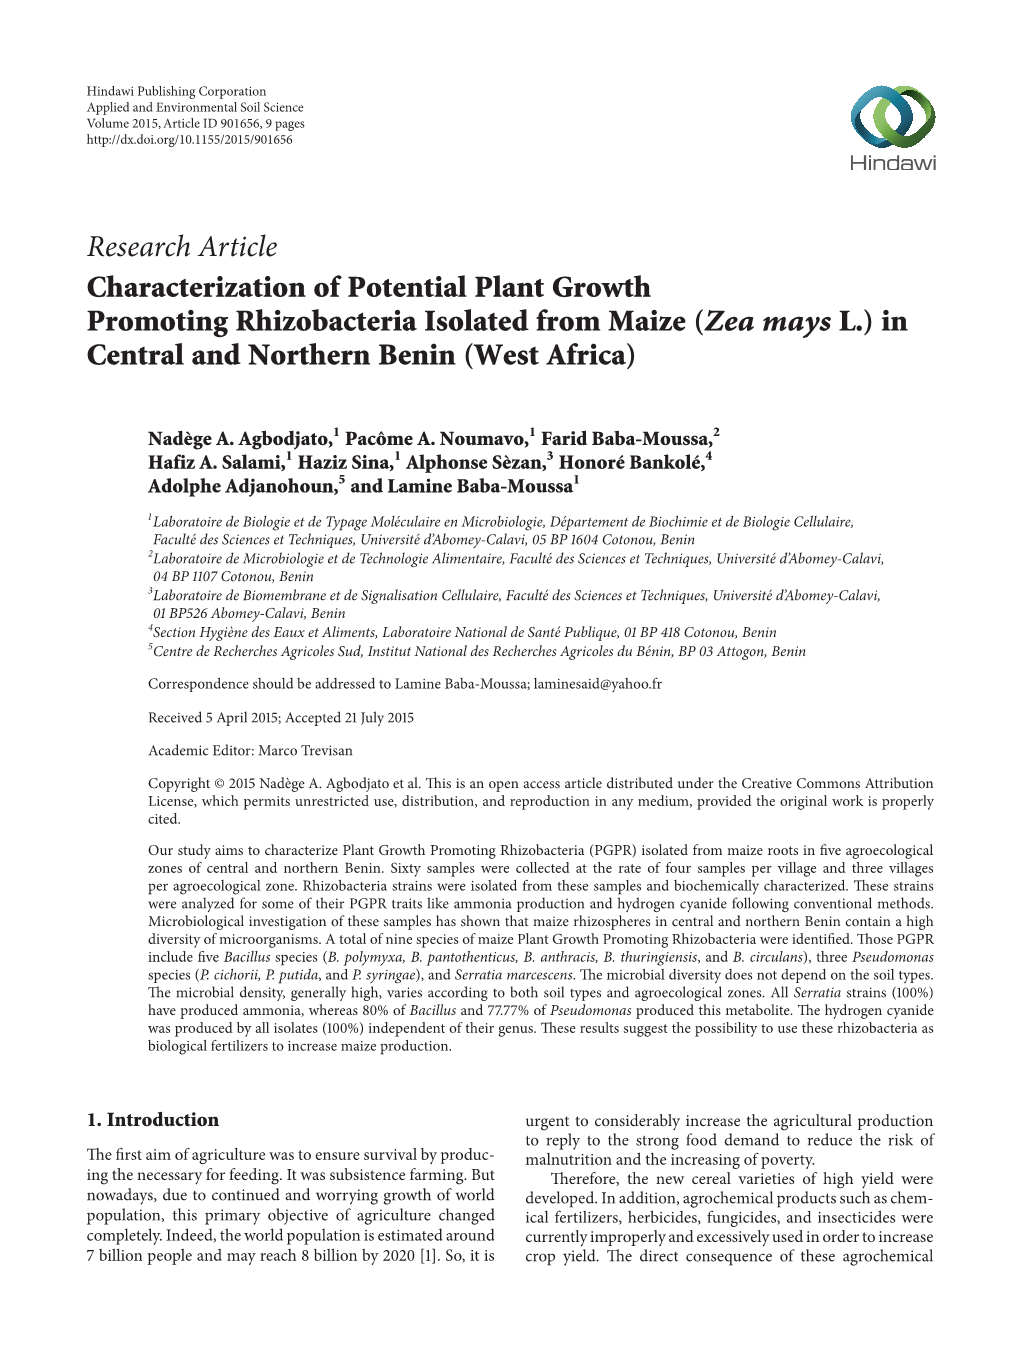 Characterization of Potential Plant Growth Promoting Rhizobacteria Isolated from Maize (Zea Mays L.) in Central and Northern Benin (West Africa)